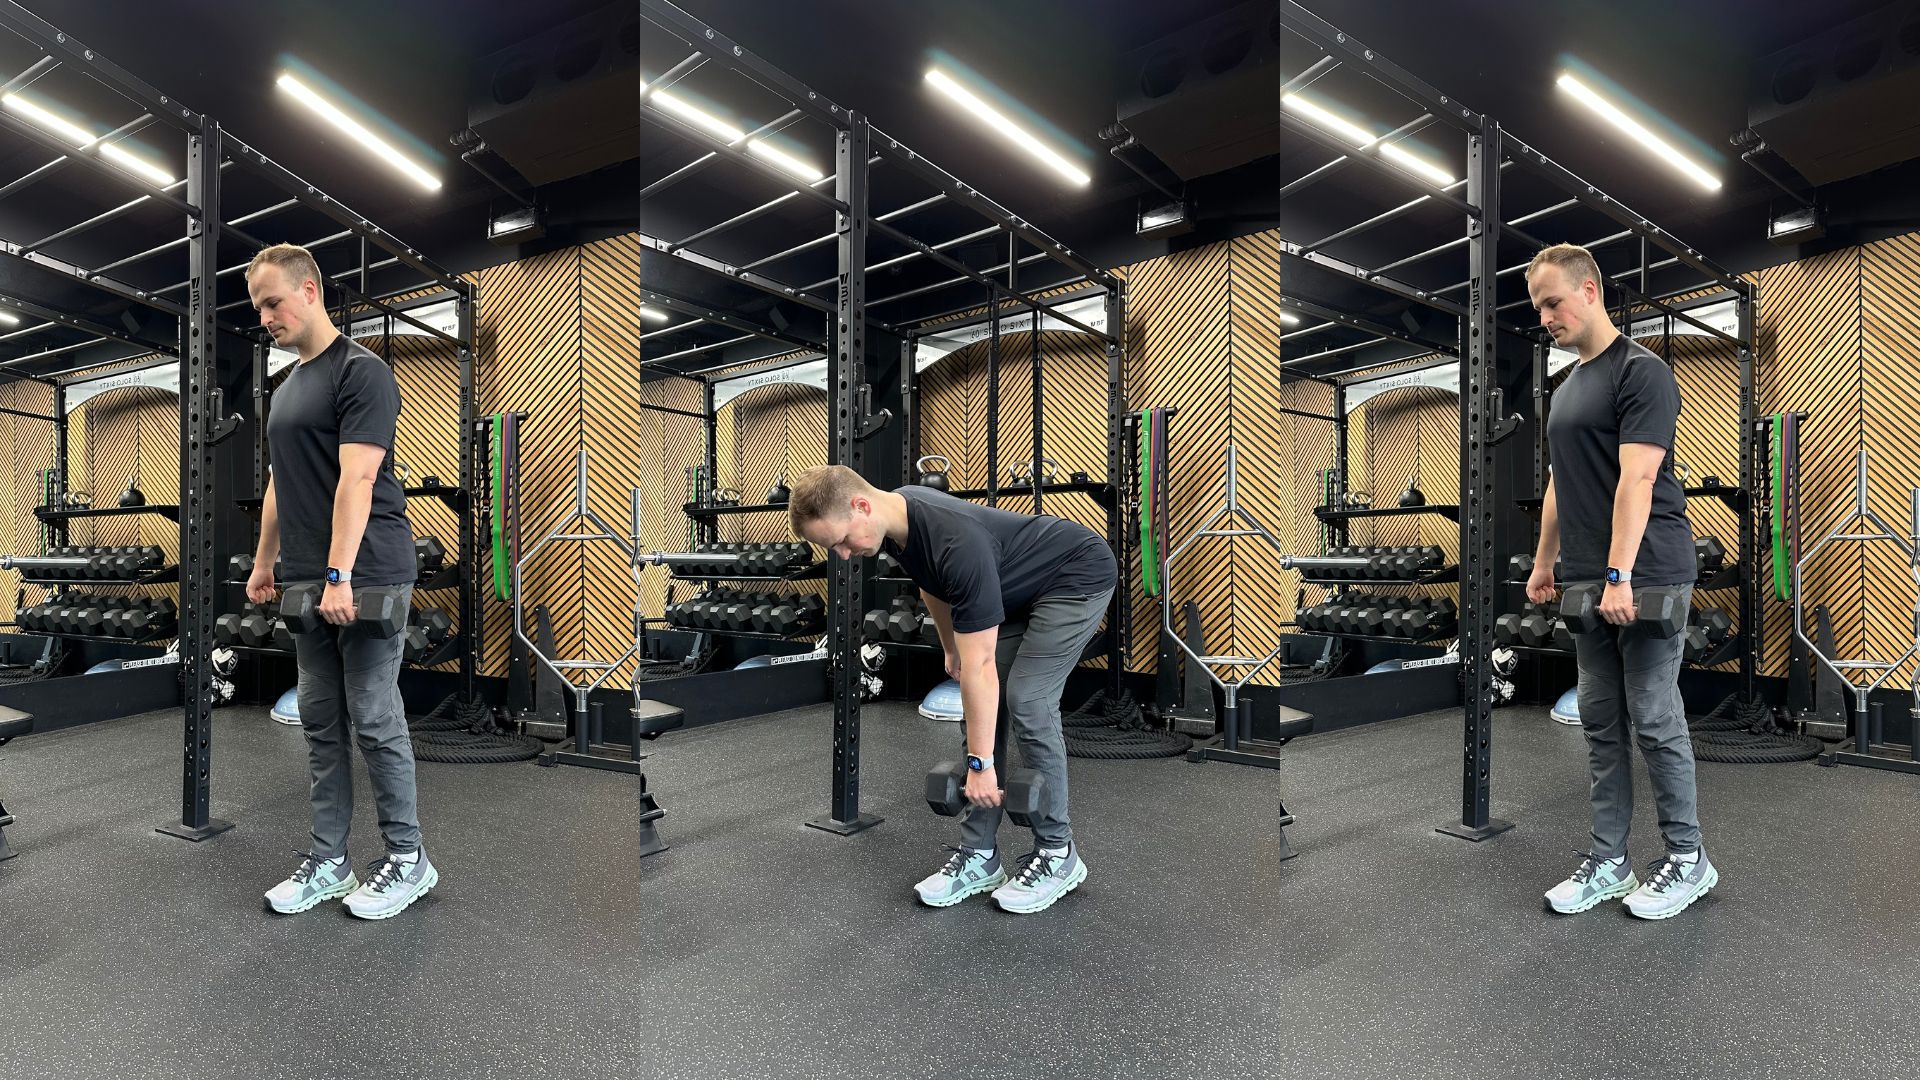 Ollie Thompson demonstrates three positions of the B-stance Romanian deadlift